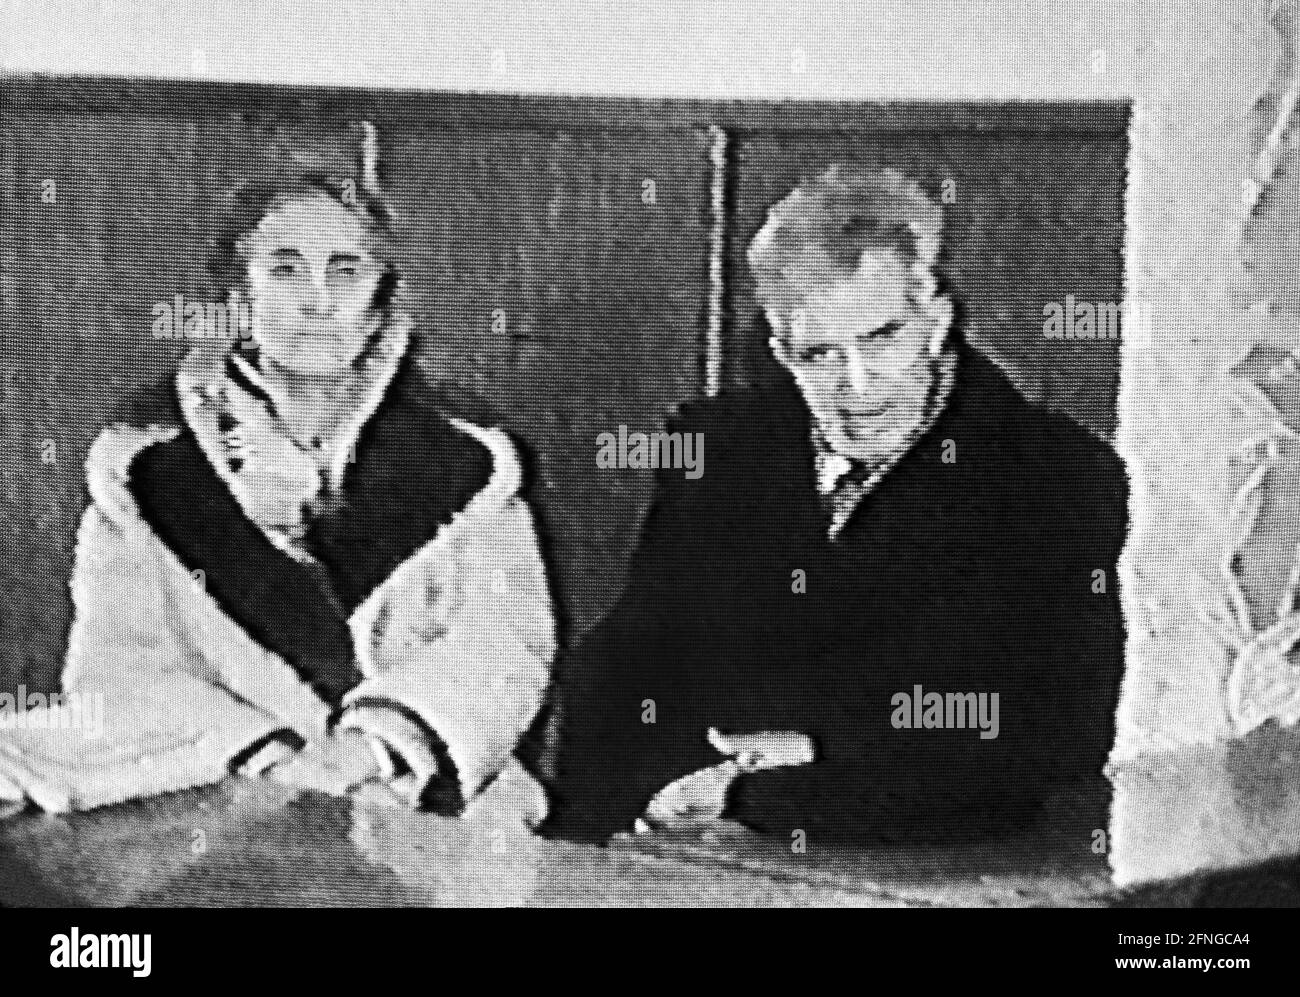 Romania, Bucharest, 25.12.1989. Archive No: 12-04-31 Ceausescu before military court Photo:Nicolae and Elena Ceausescu before the military court [automated translation] Stock Photo